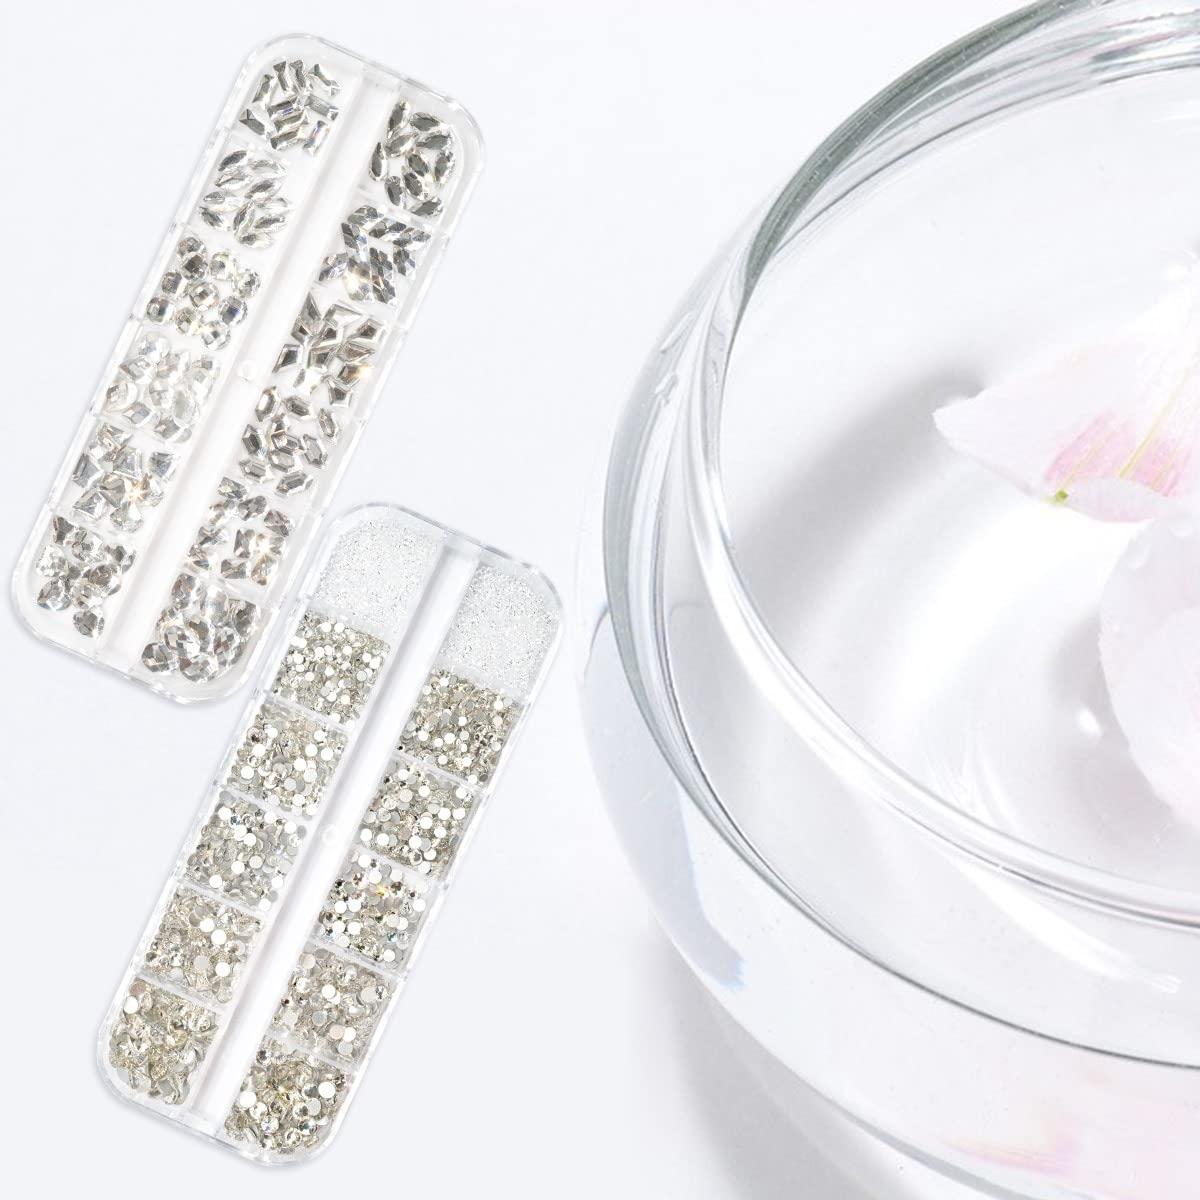 4320Pcs SS6 Flatback Rhinestones for Crafts Bulk Clear-White Craft Gems  Nail Crystals Jewels Glass Diamonds Stone-Small Silver Rhinestones for  Nails